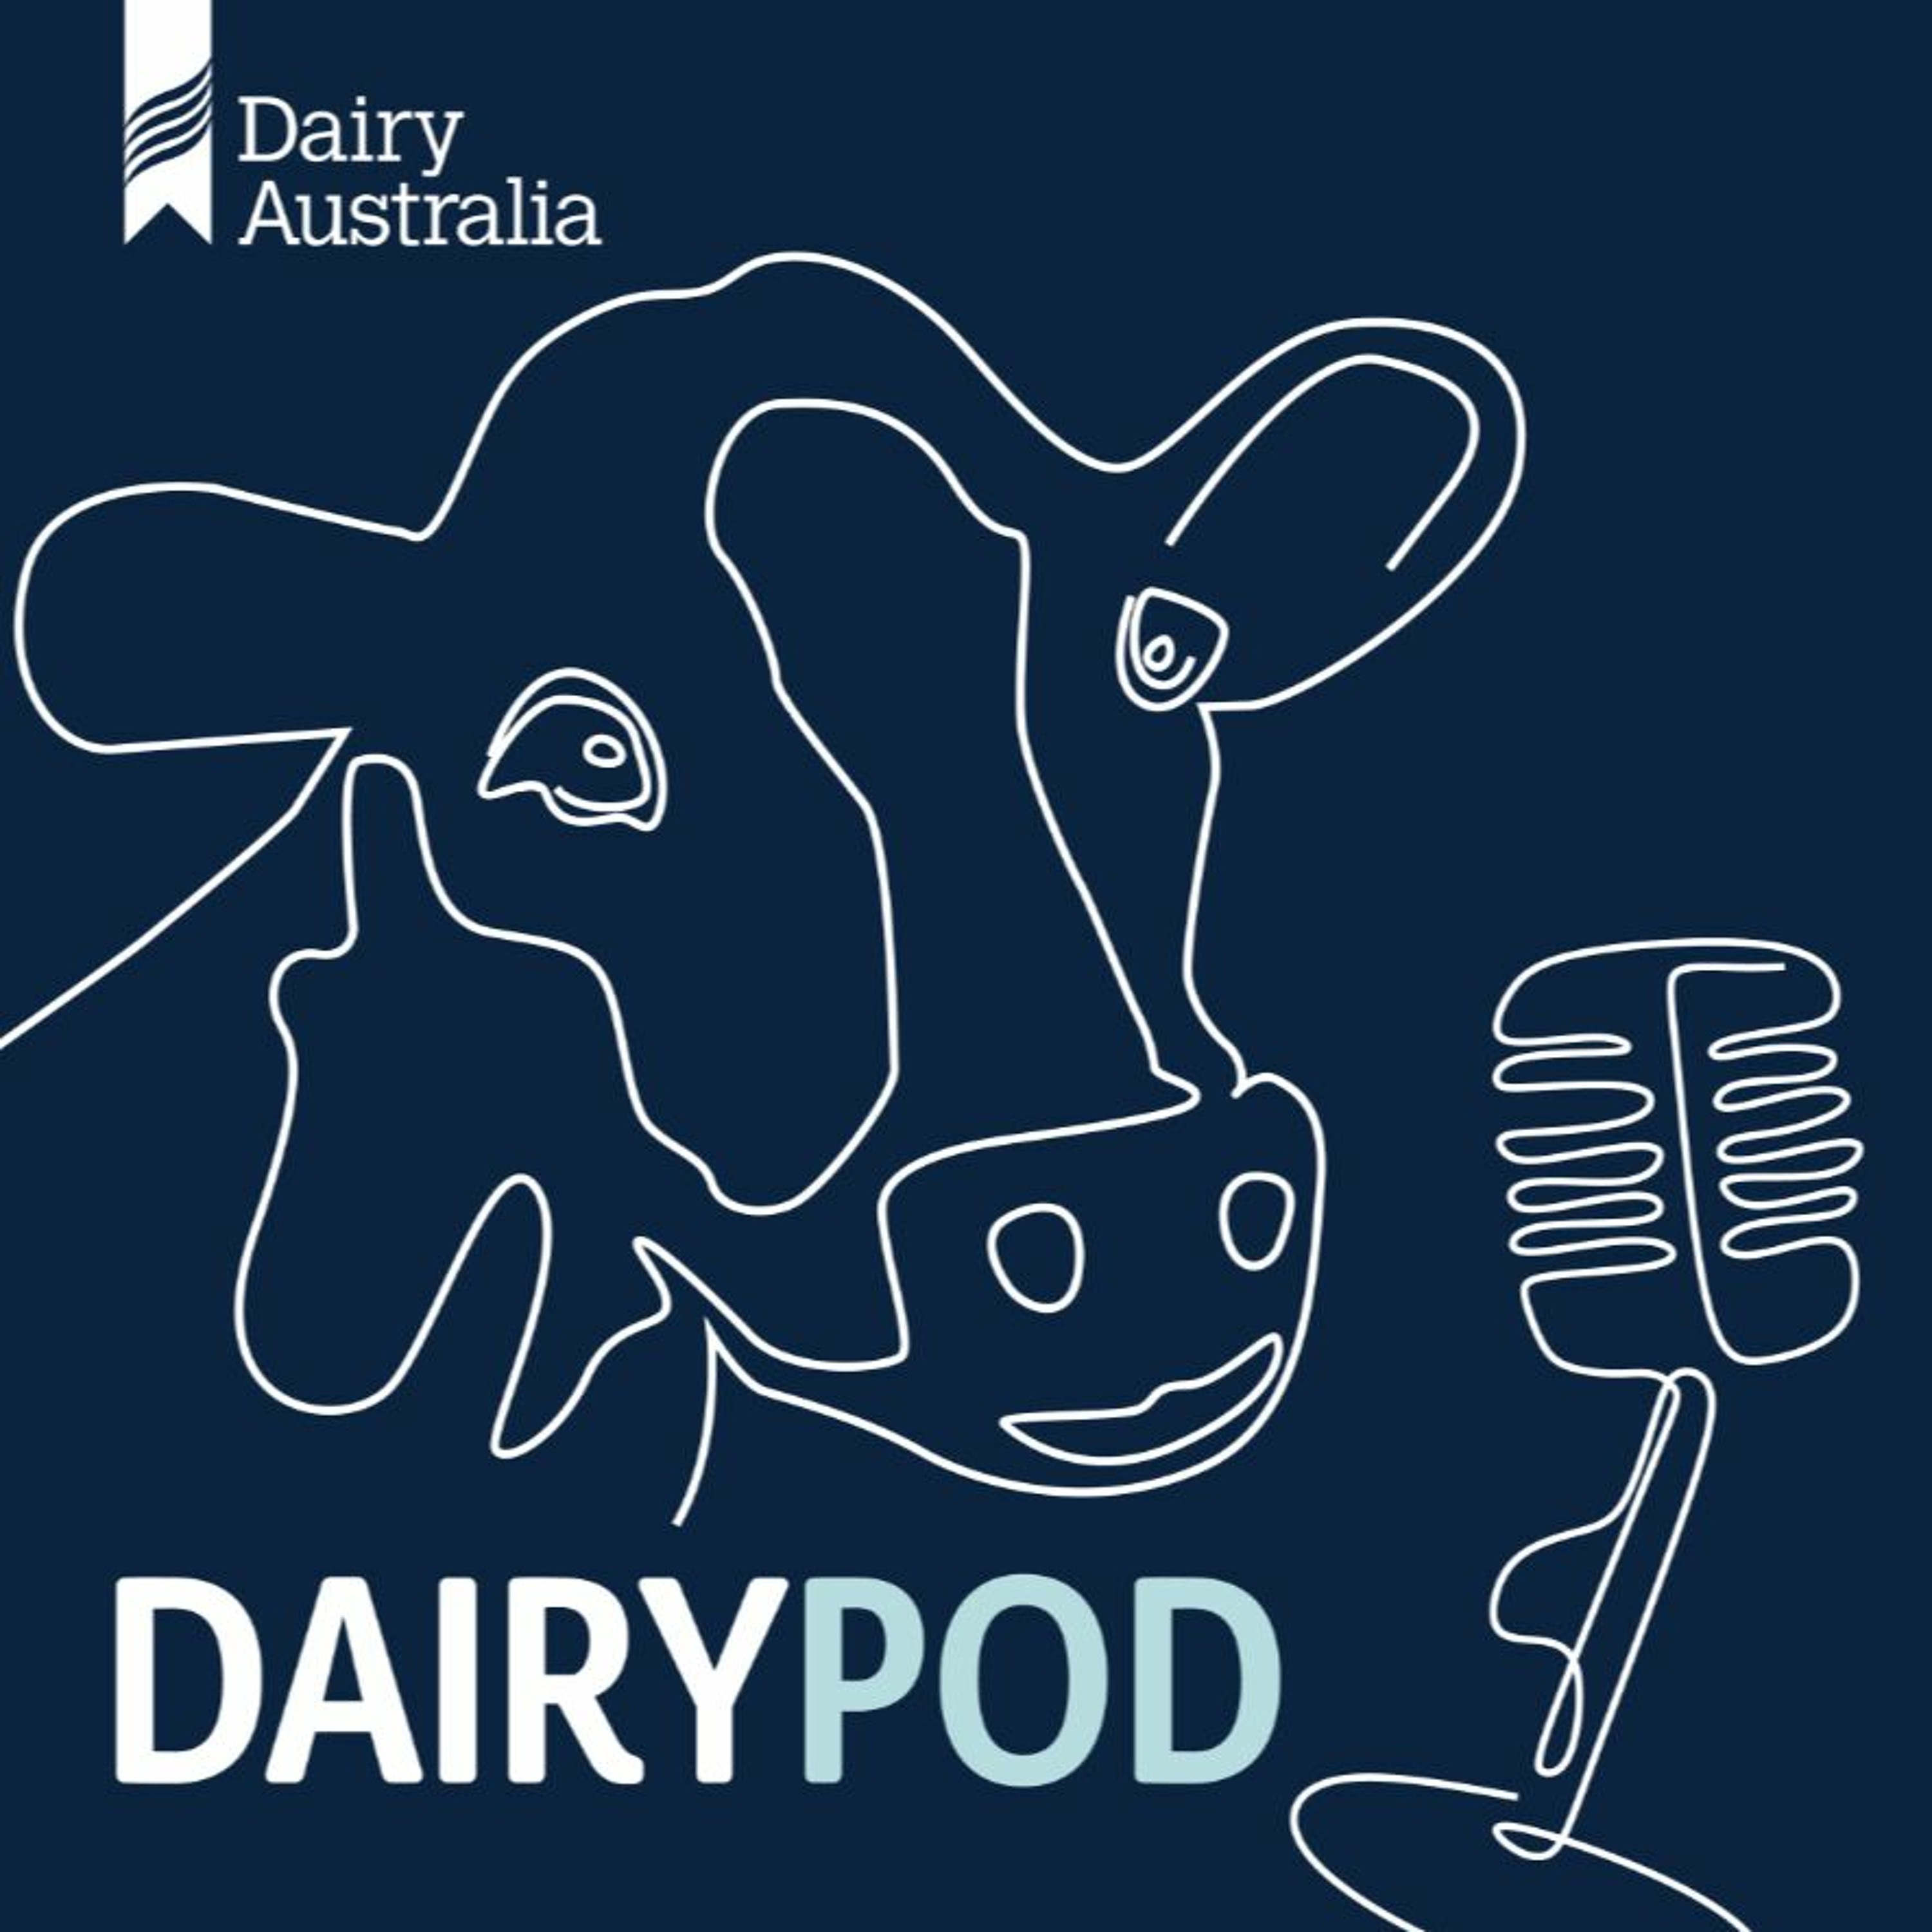 Podcast 19:  Dairy farmer infected with COVID-19 tells his story